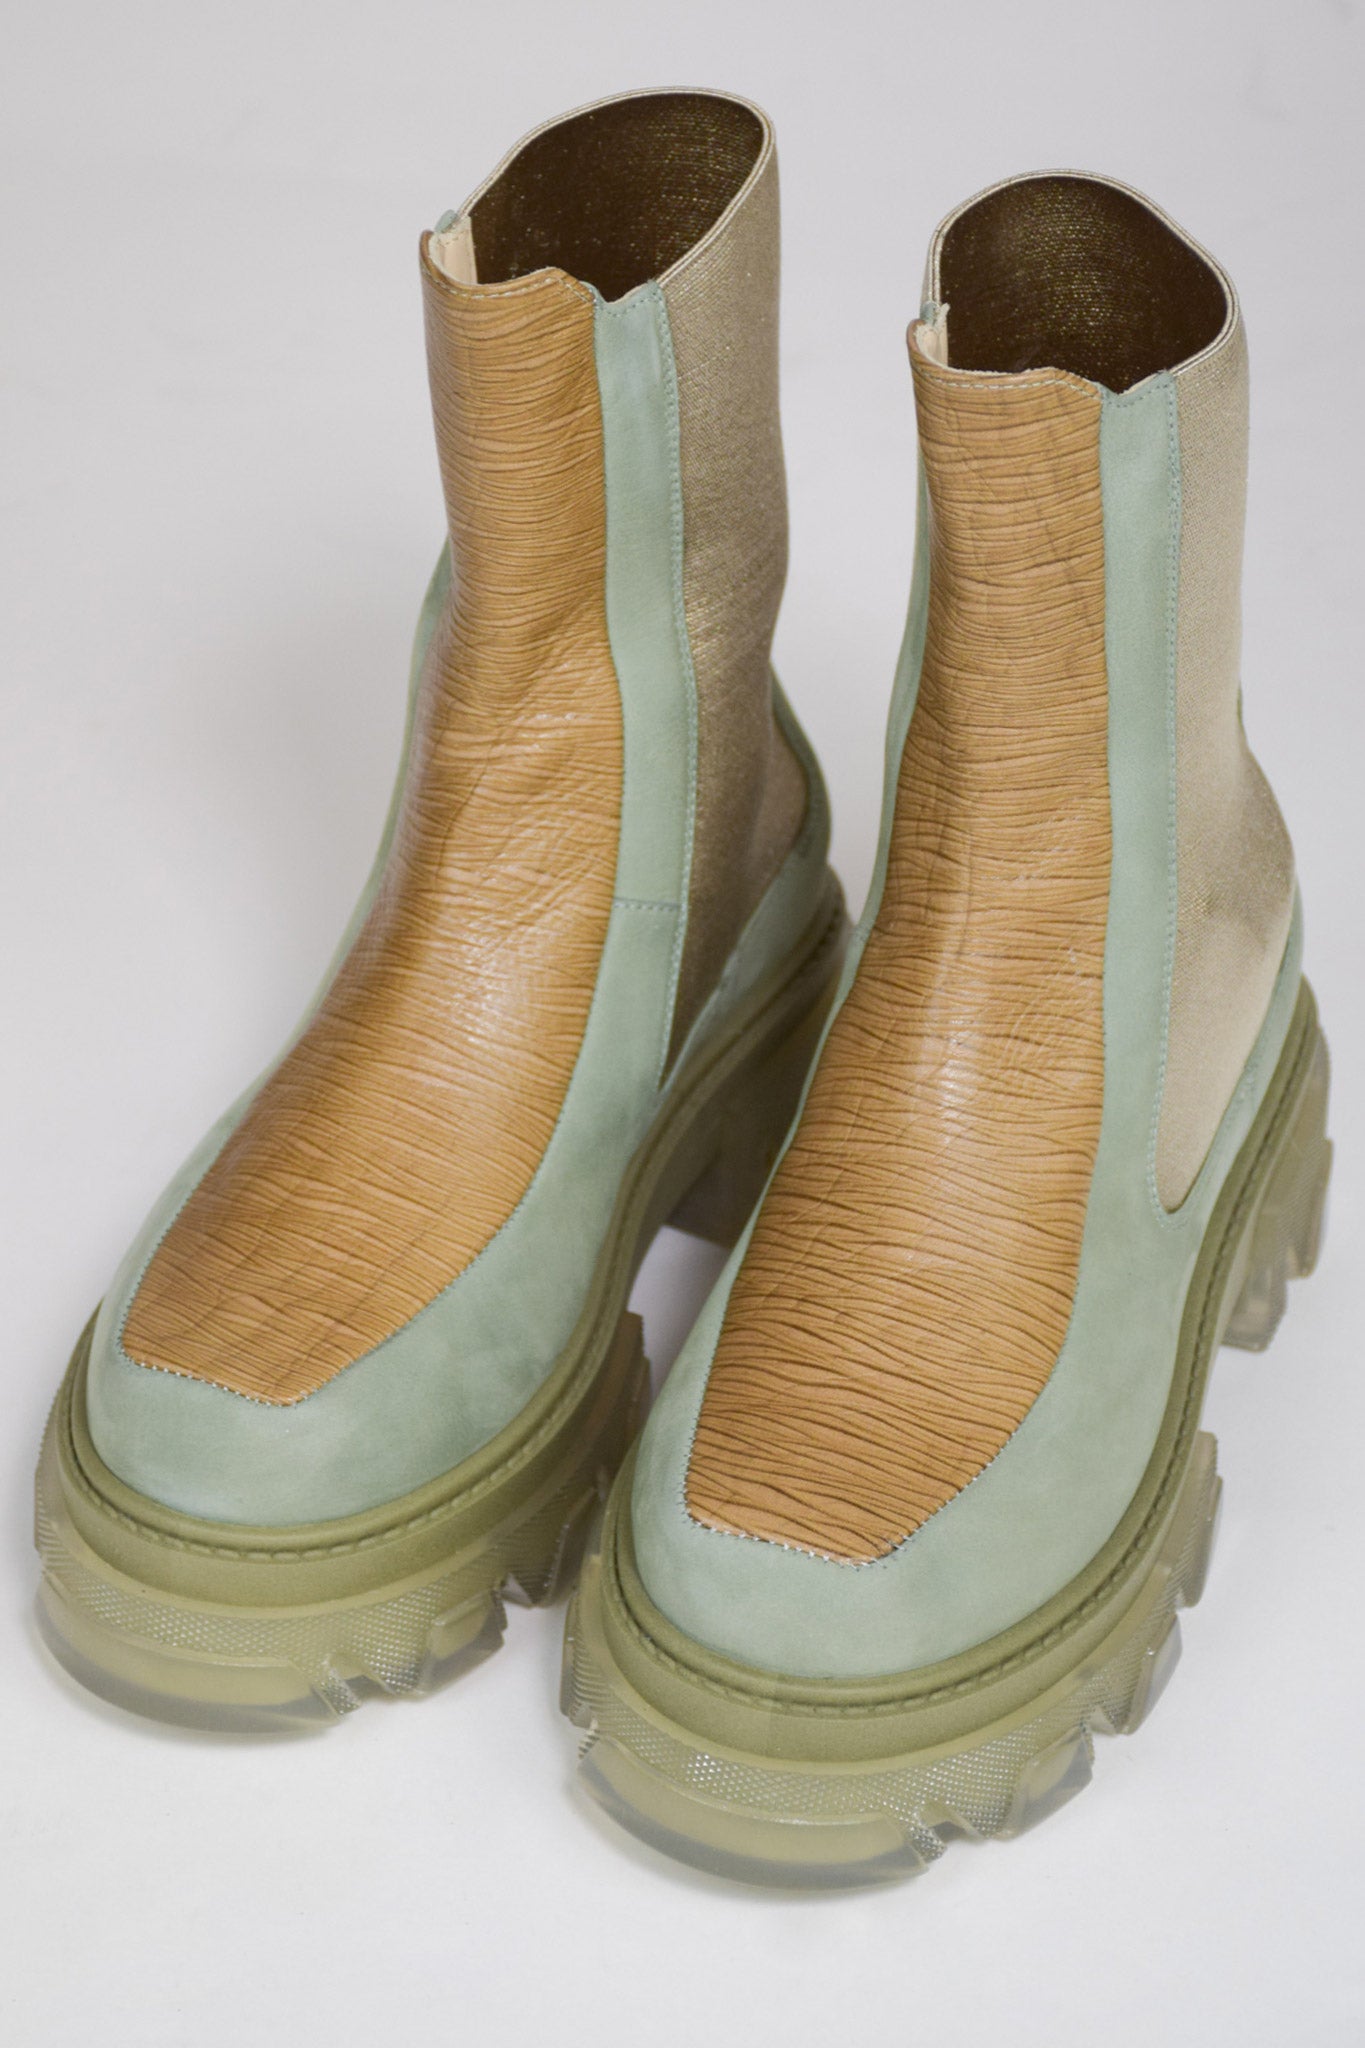 BOOTS WITH SERIGRAPH INSERTS AND HALF TRANSPARENT SOLES